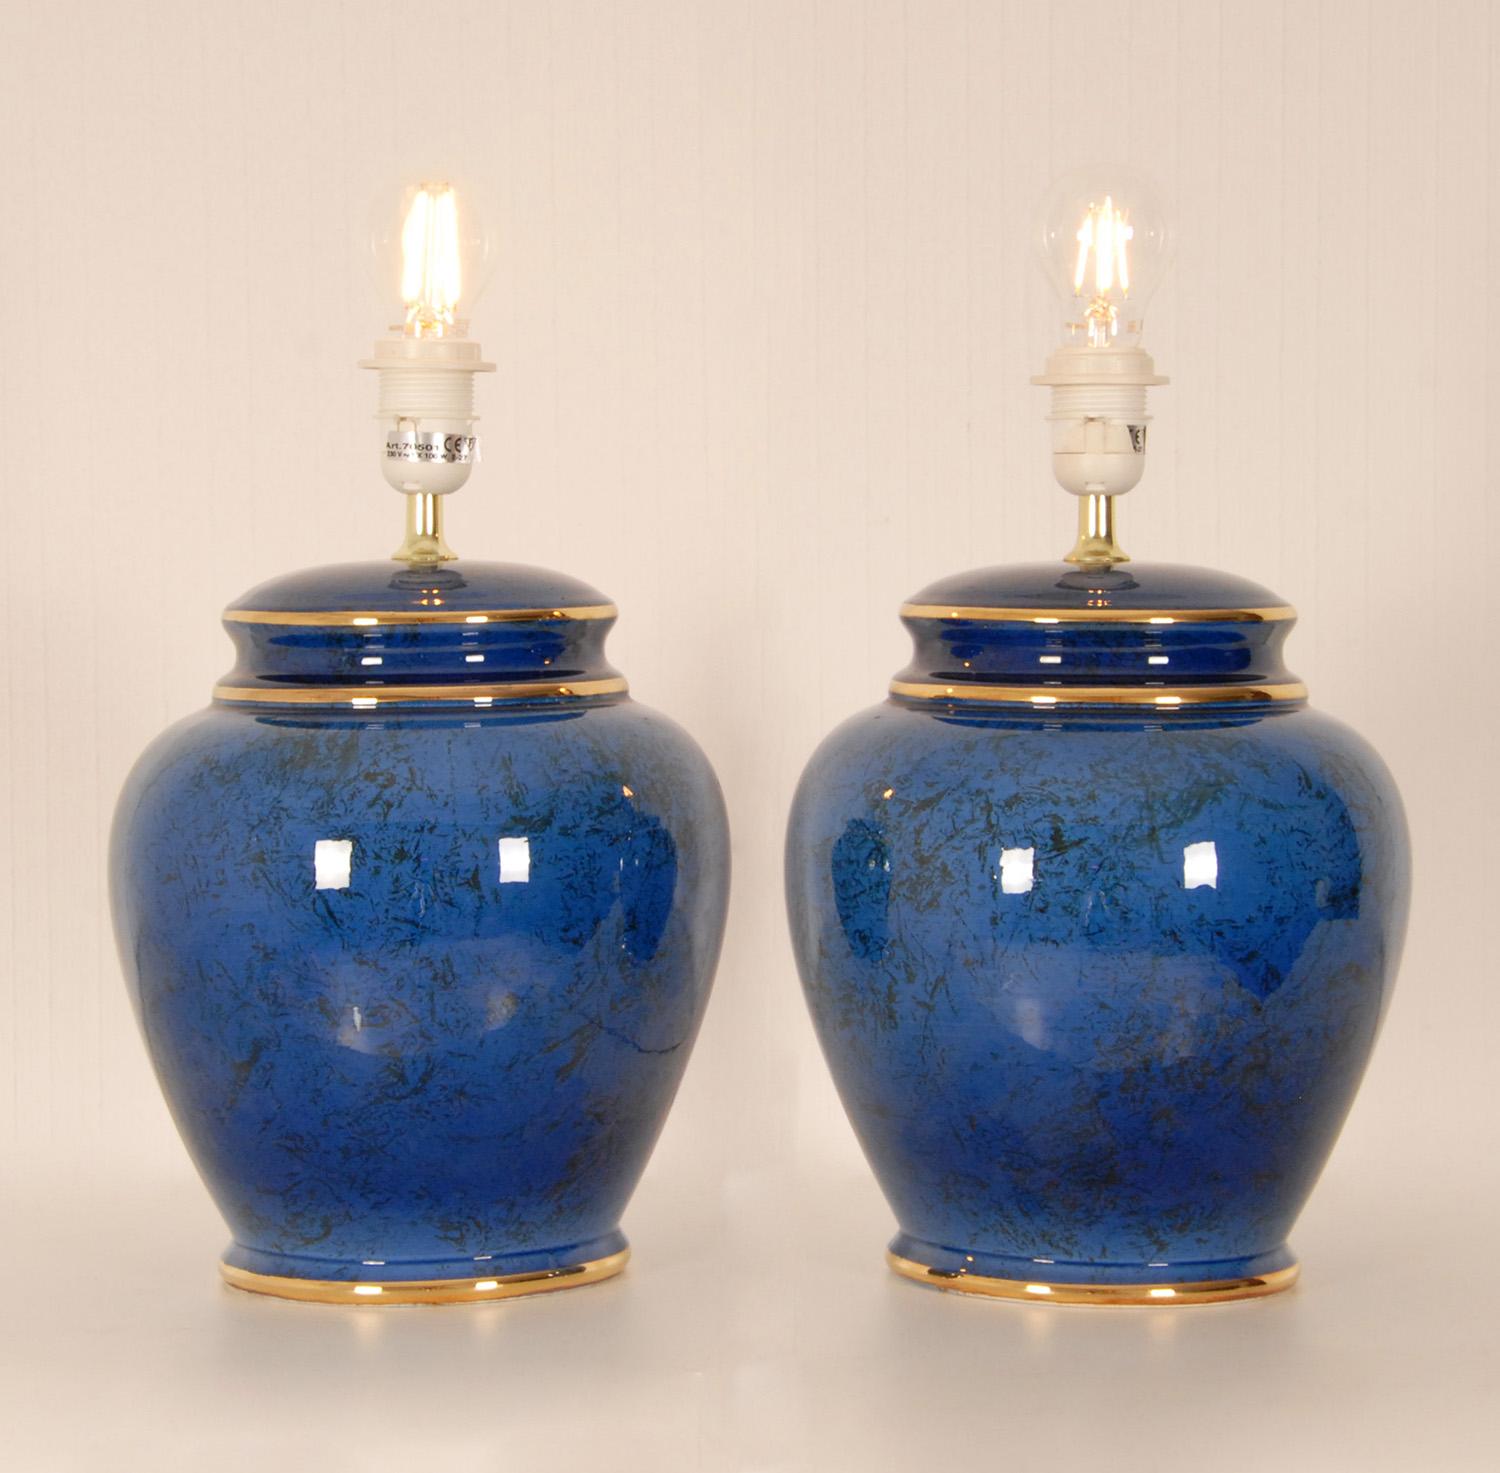 20th Century Vintage French Ceramic Lamps Blue Gold Chinoiserie Jars Vase Table Lamps a Pair